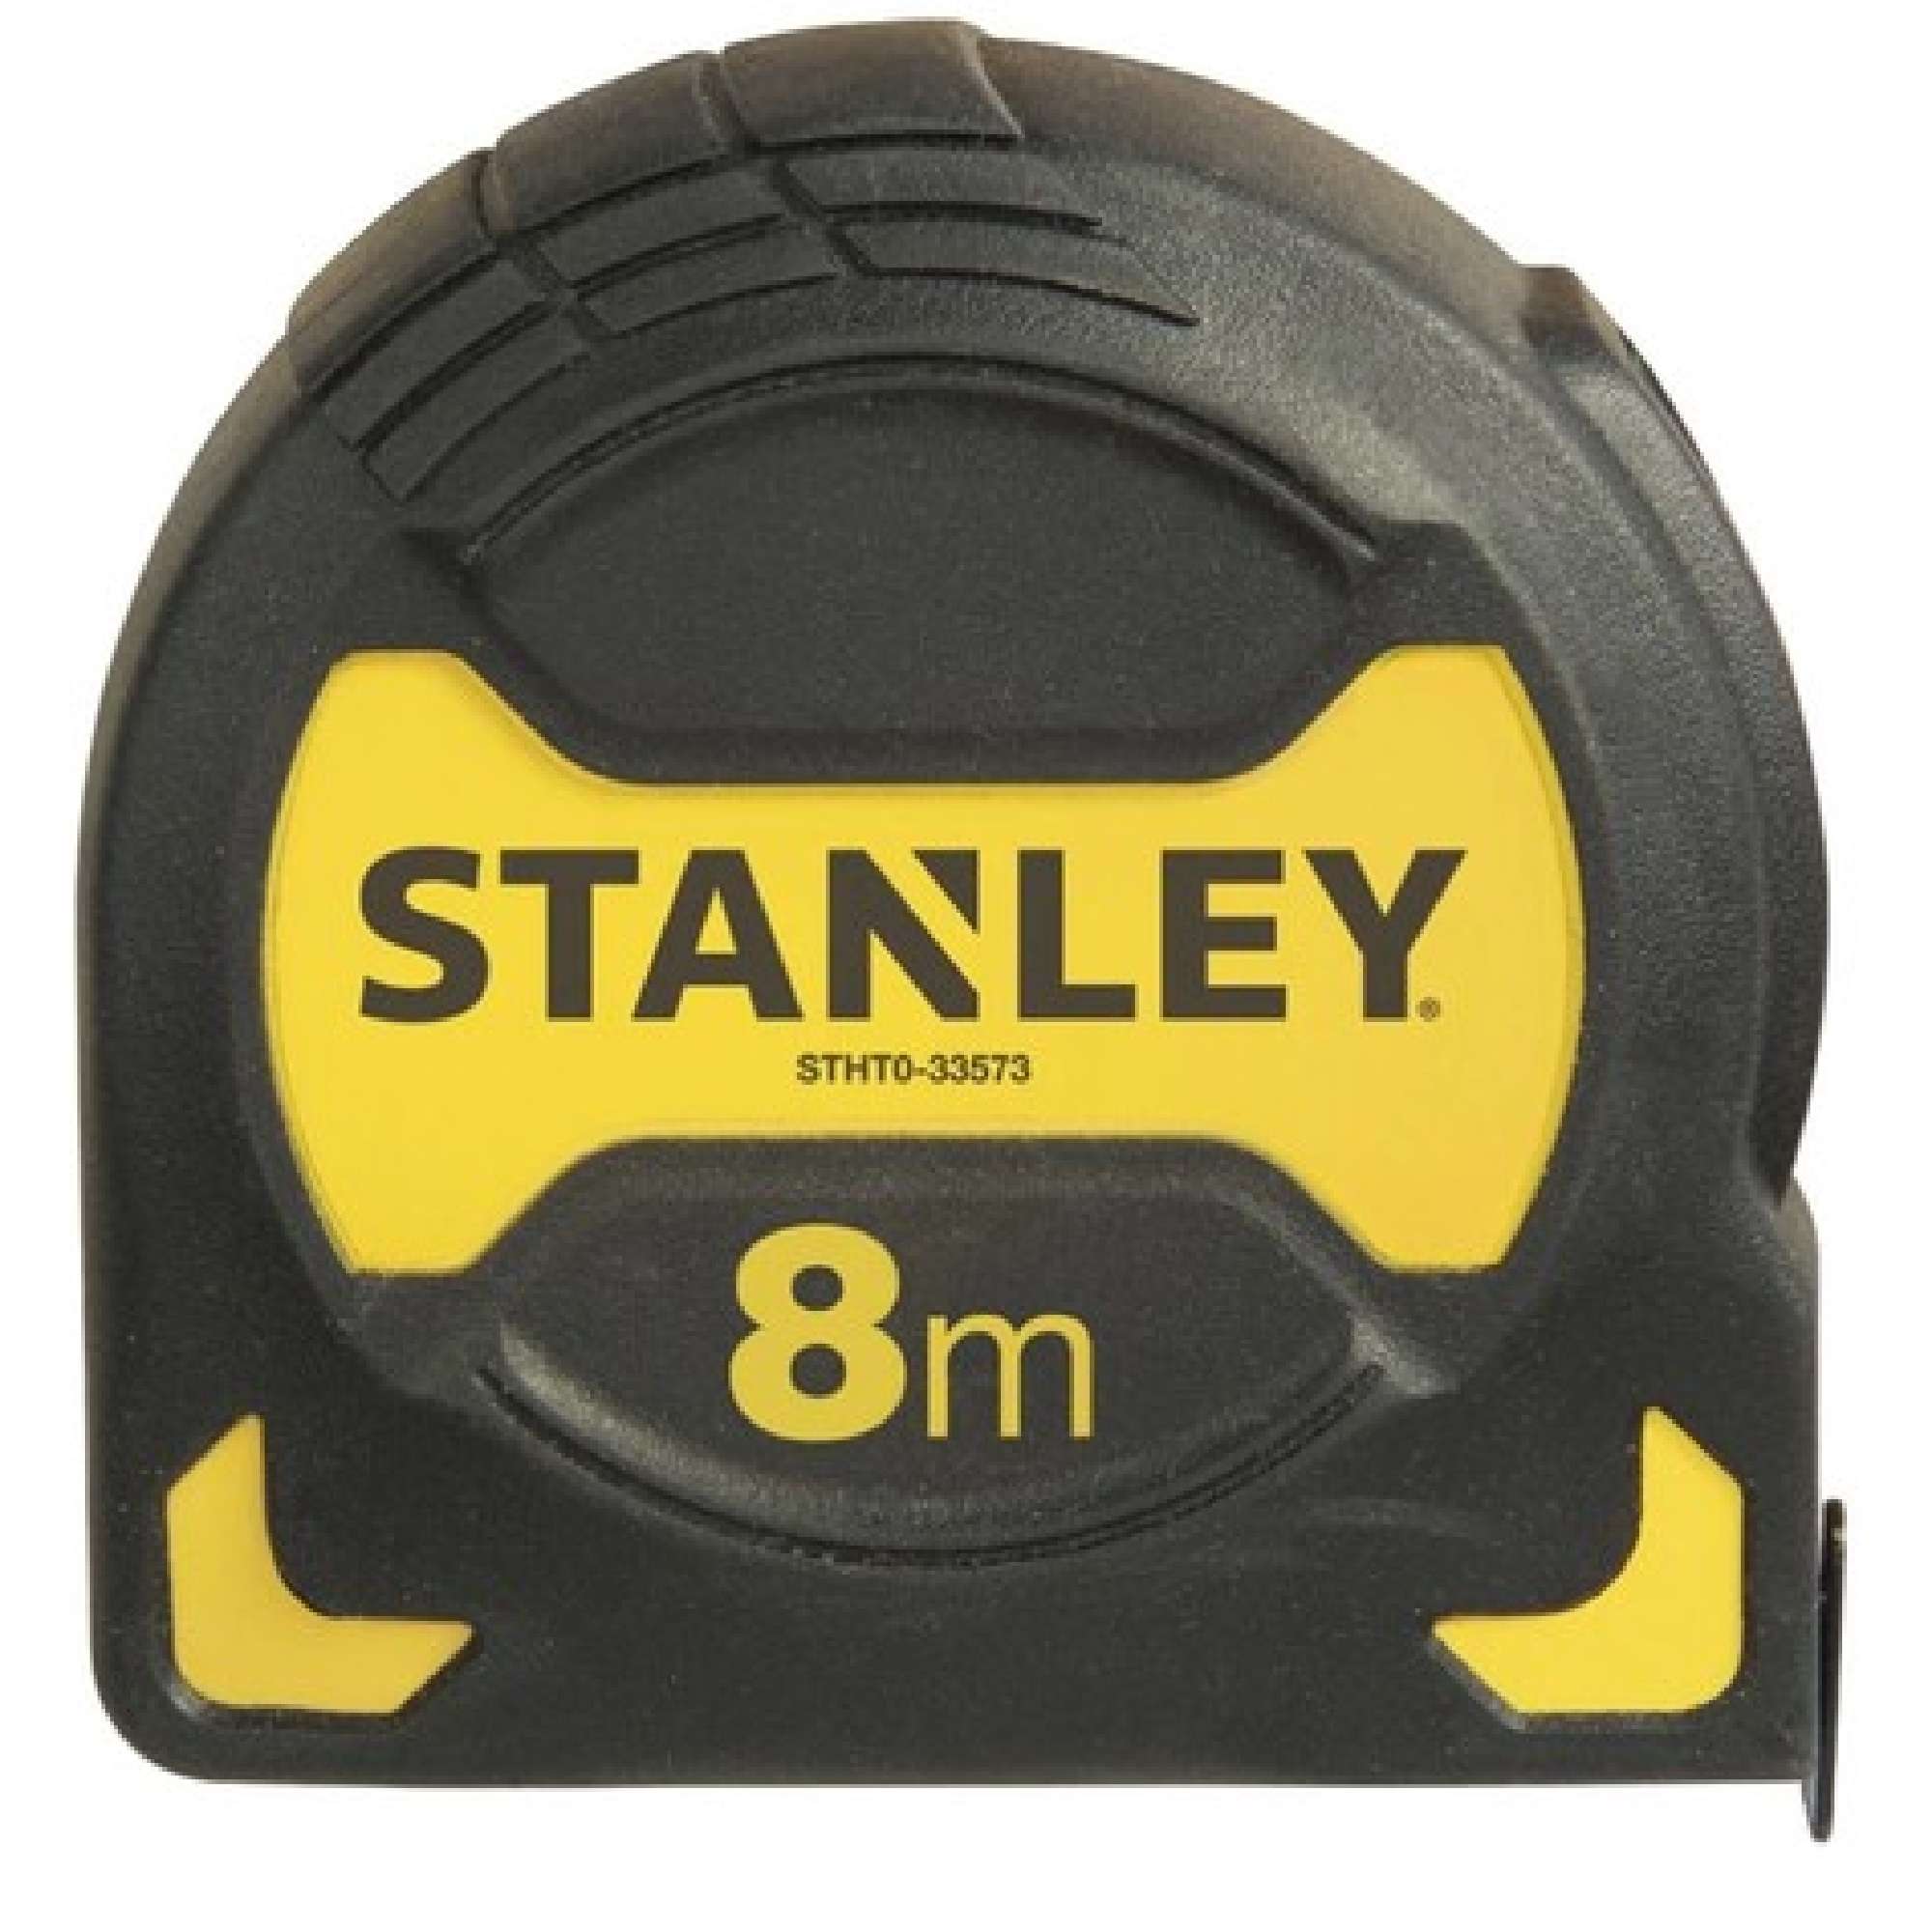 Flexometer with Grip surface that won't slip on slopes up to 42 Stanley